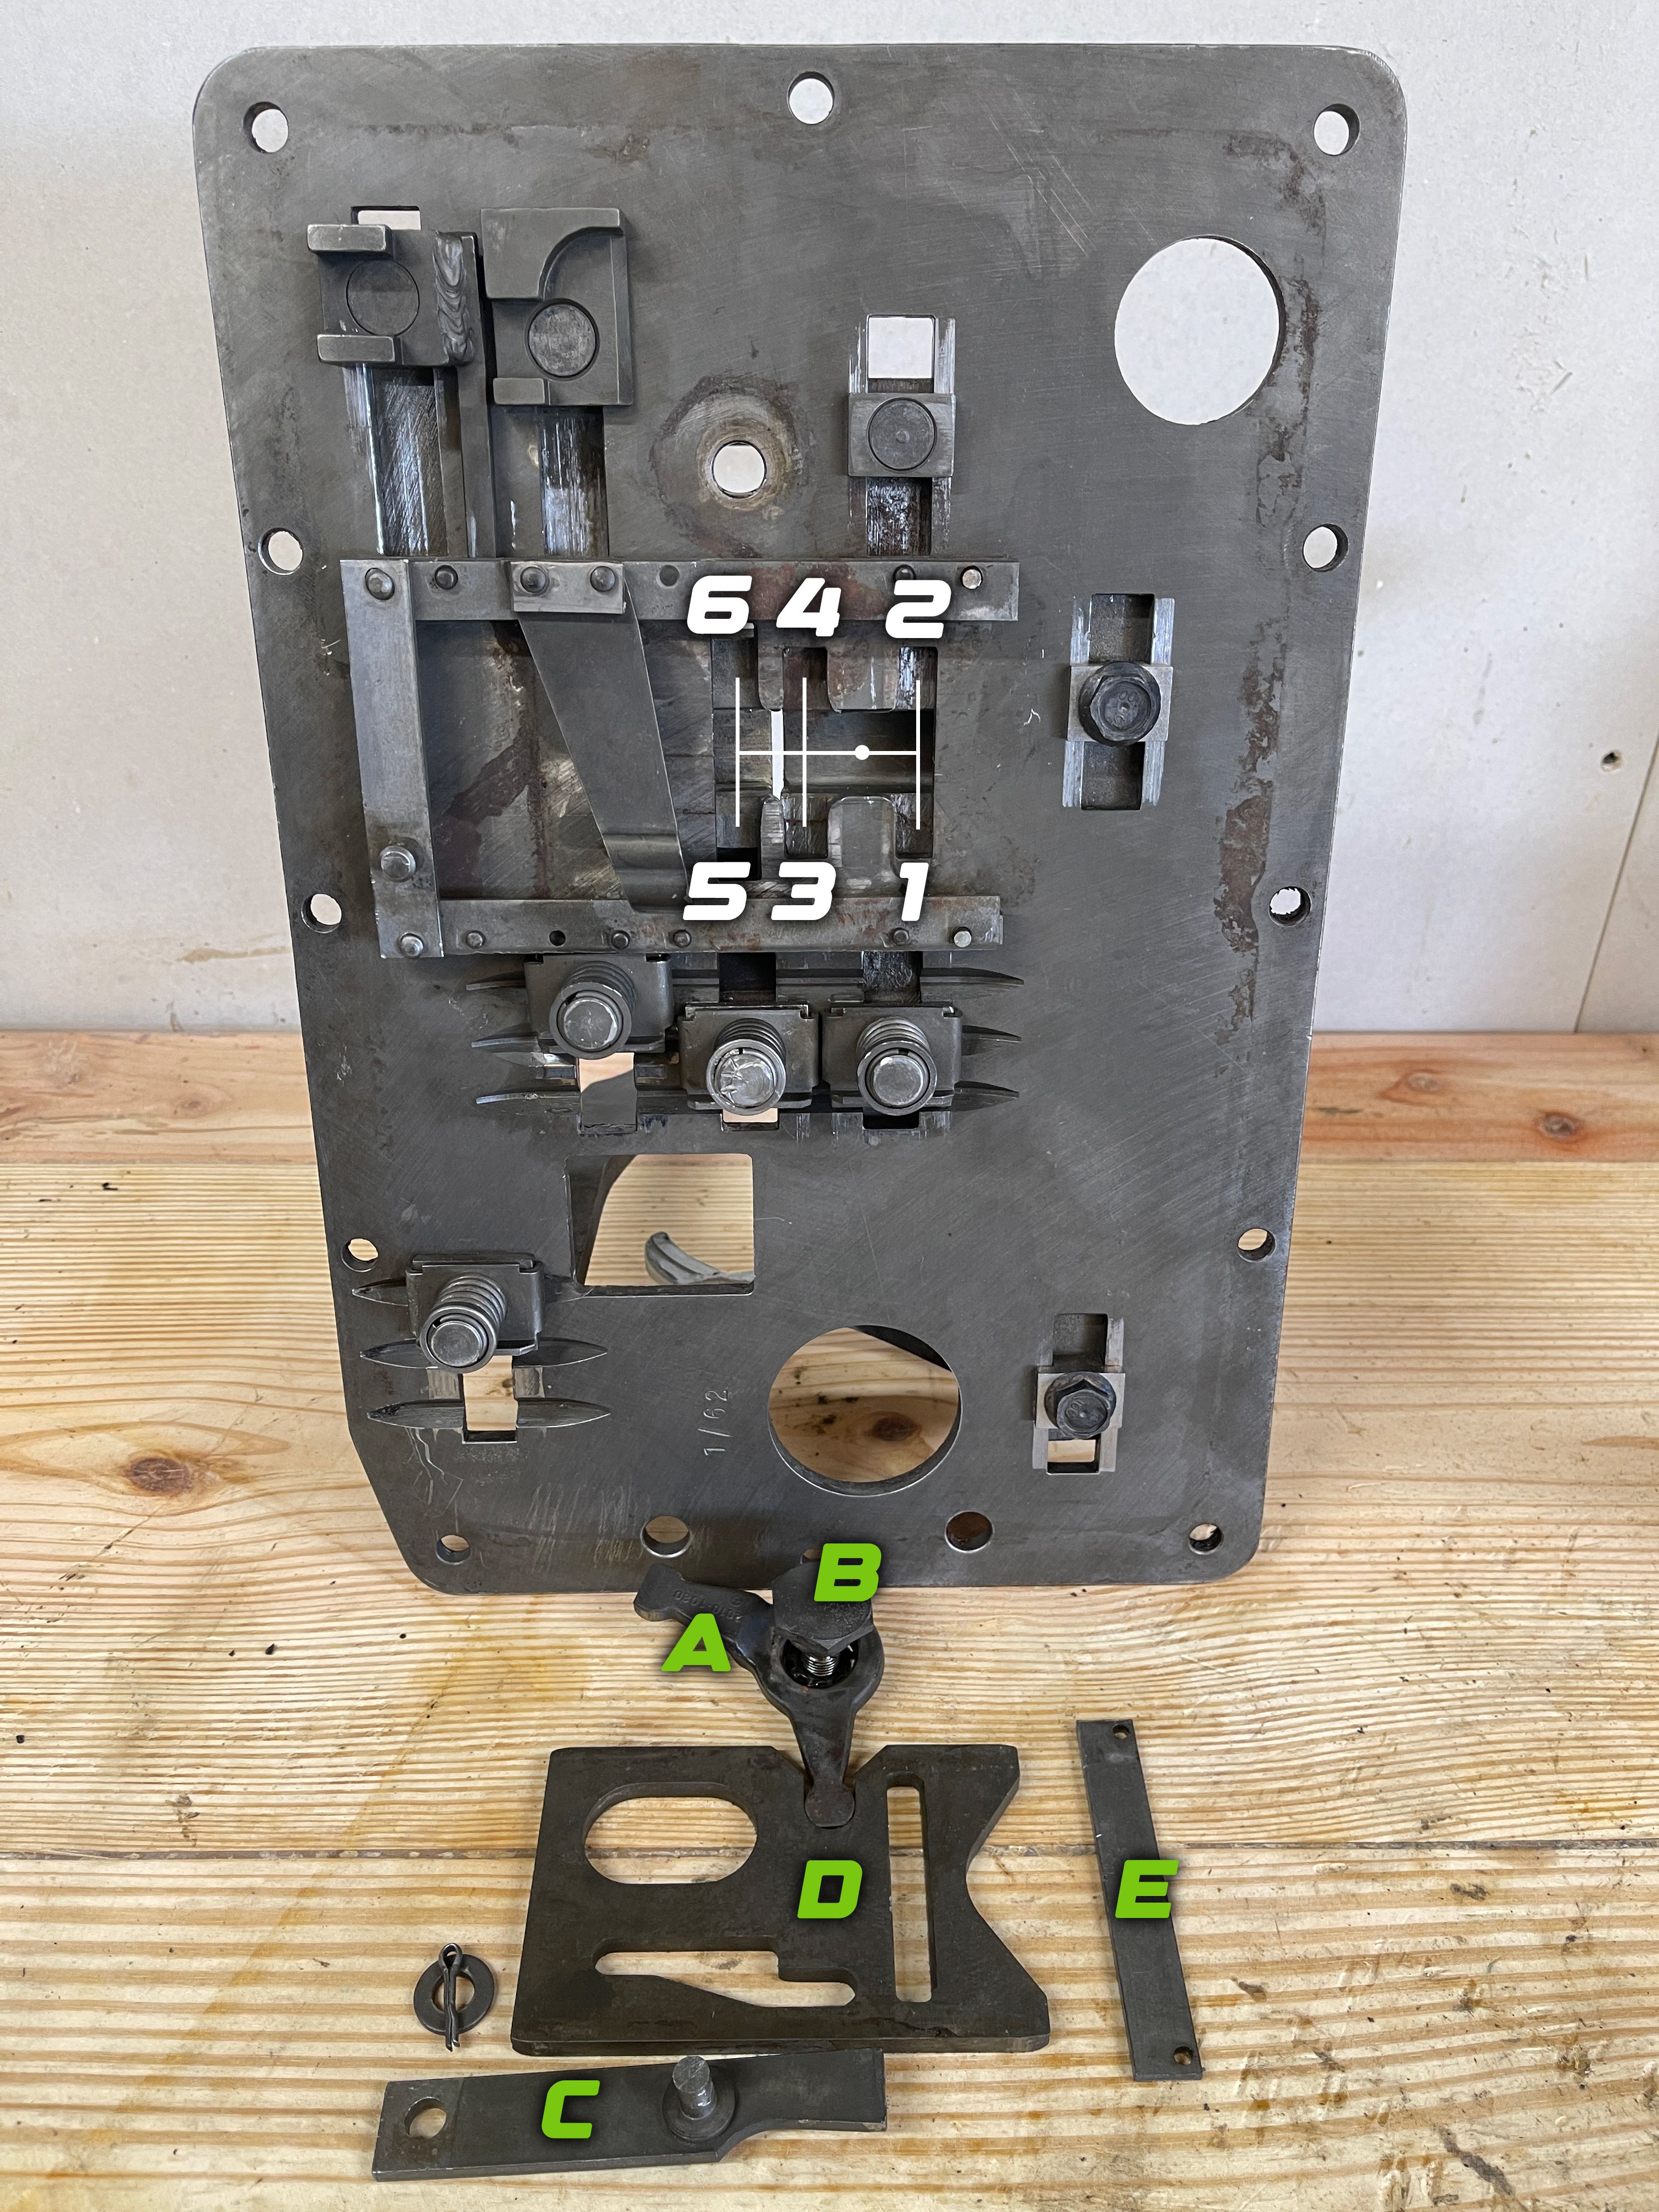 unimog_404_guide plate_parts_removed.JPG